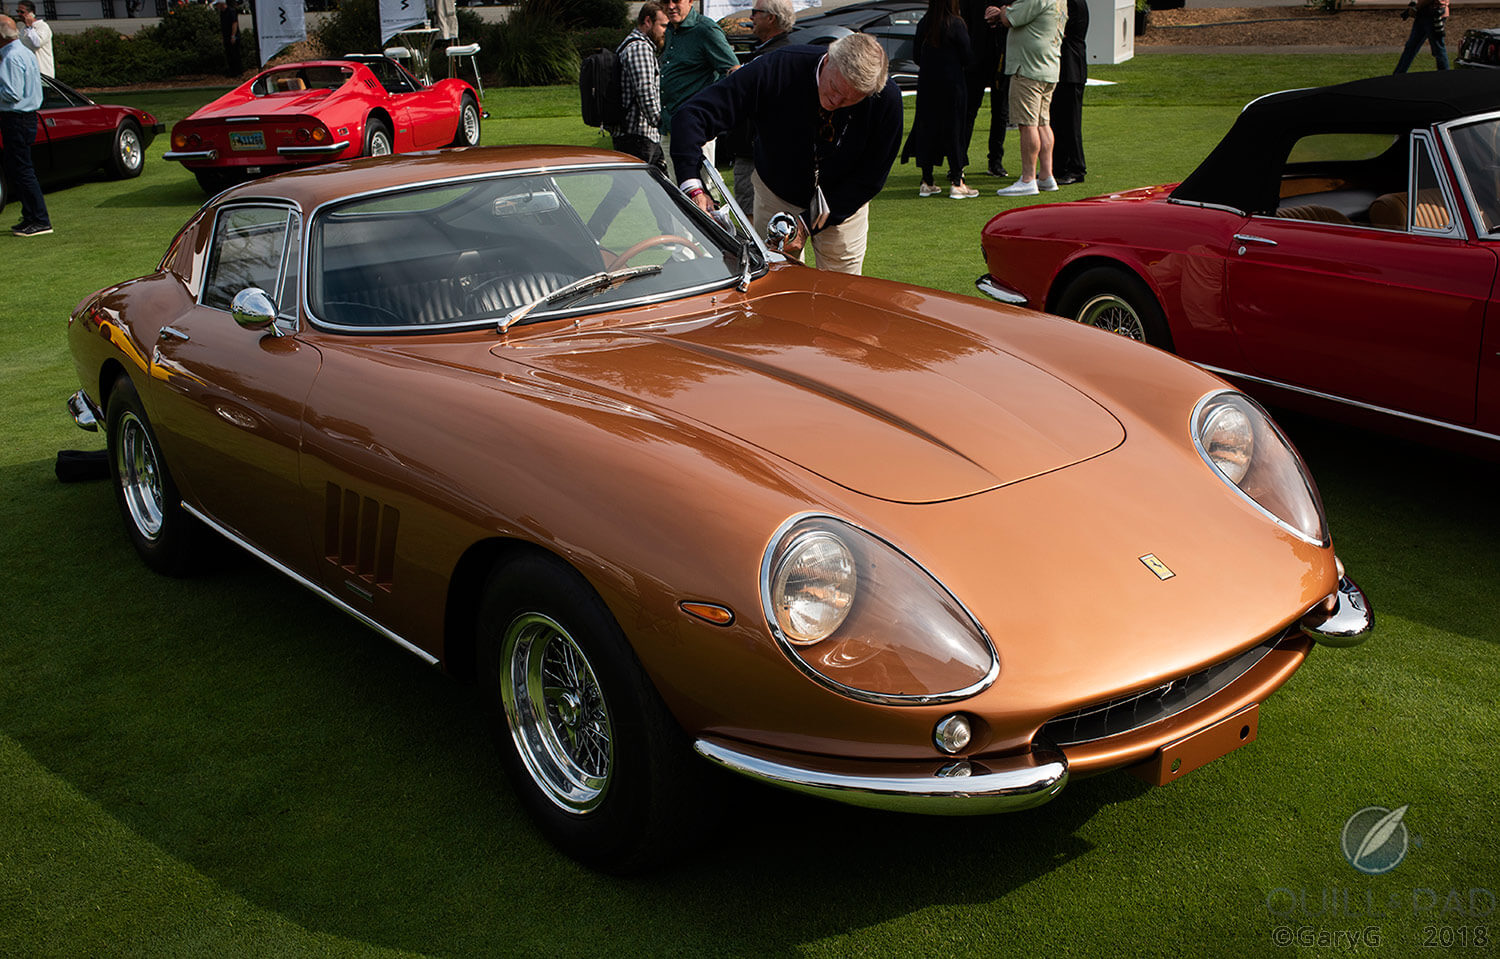 The one for me, if only: 1967 Ferrari GTB/4 at The Quail, 2018